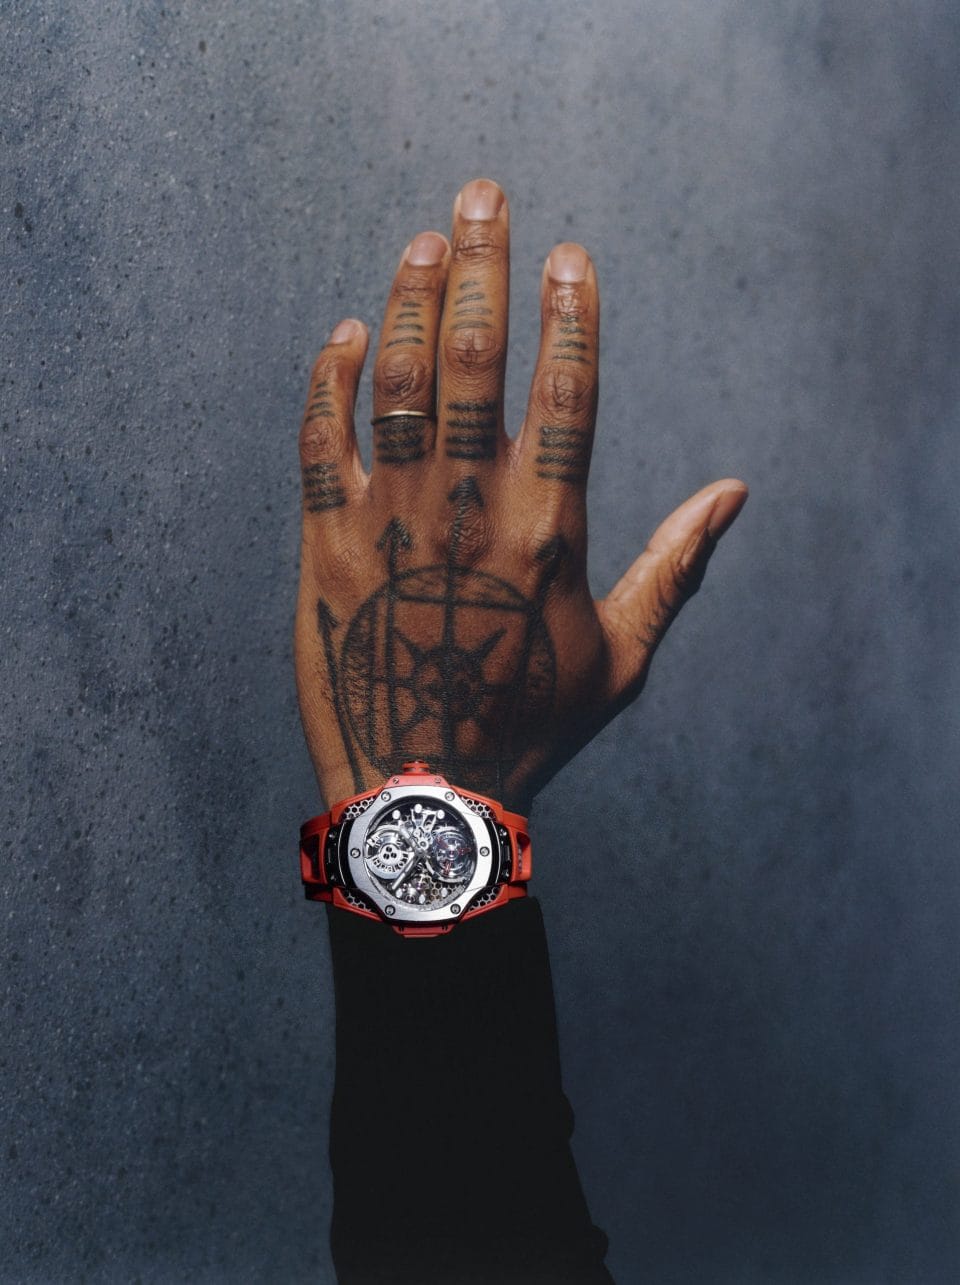 Exclusive: Samuel Ross, Founder of A-Cold-Wall*, Discusses His Latest Creation With Hublot